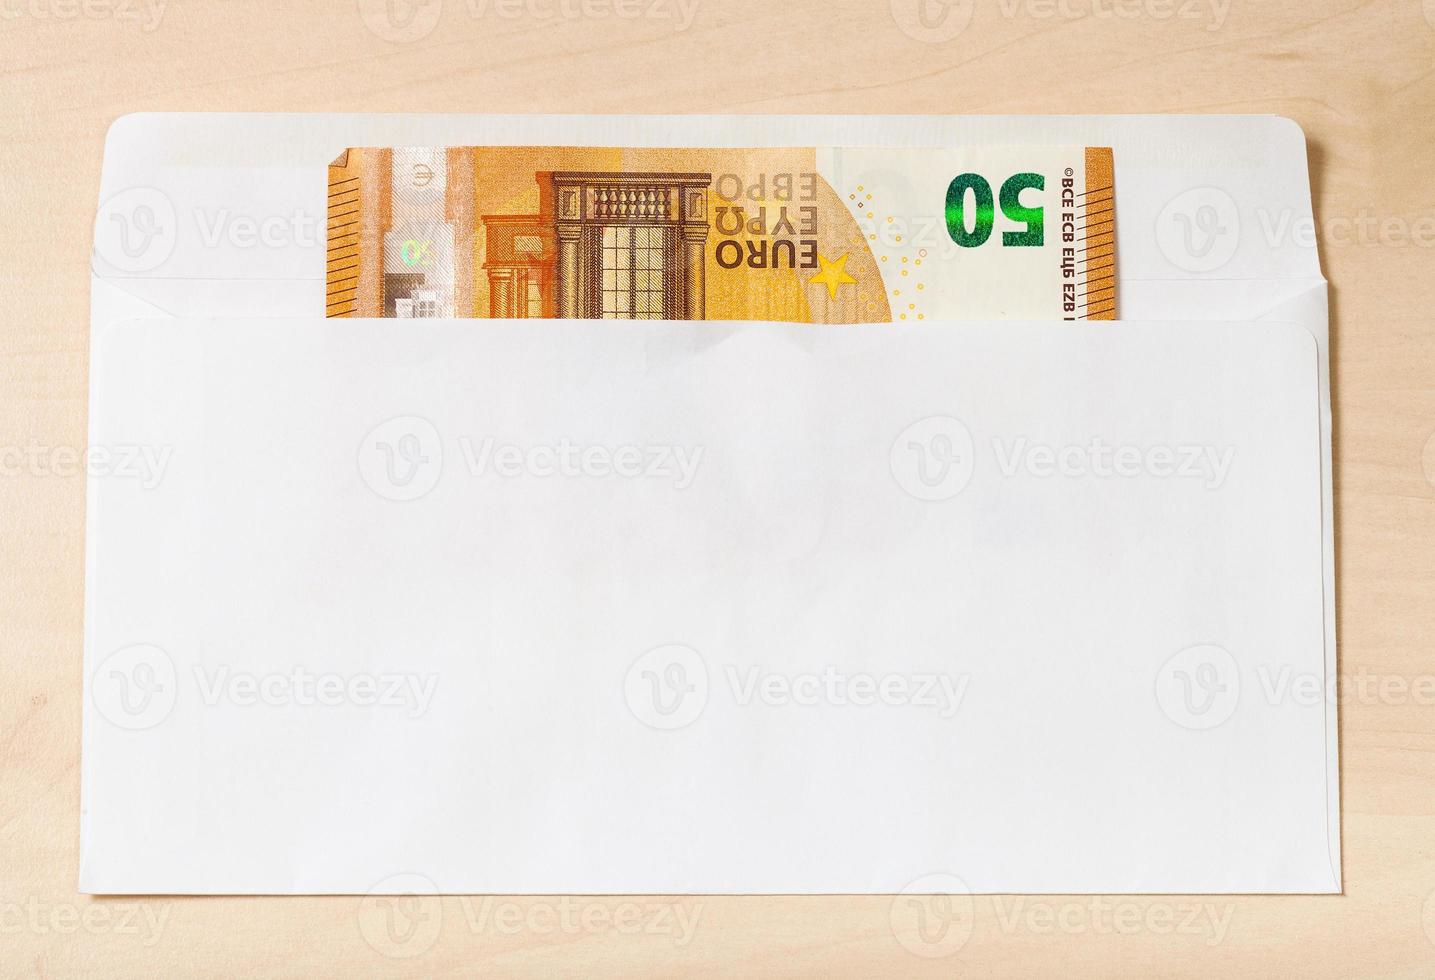 single fifty euro note in open envelope on table photo